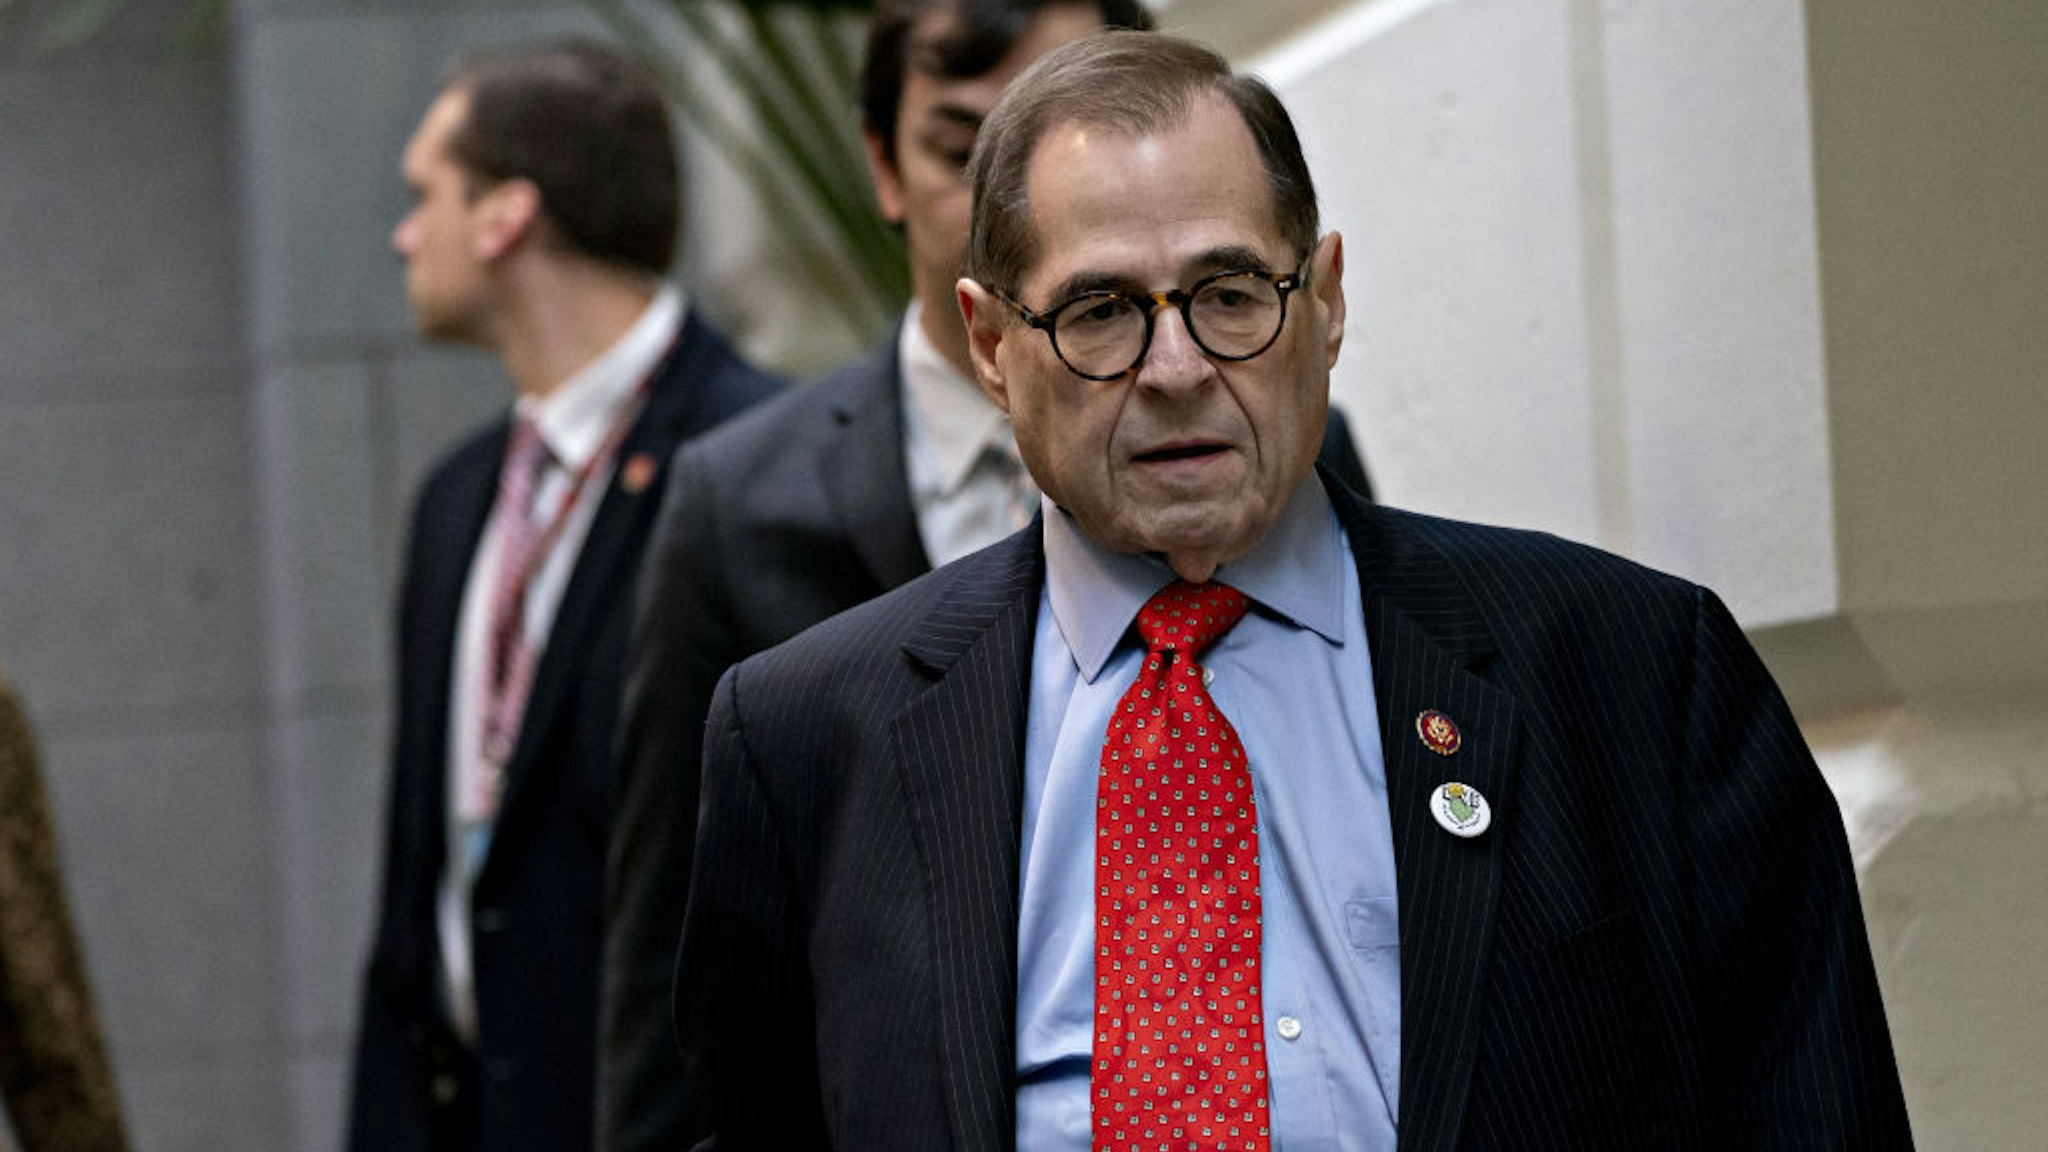 Representative Jerry Nadler, a Democrat from New York, arrives to a weekly Democratic caucus meeting at the U.S. Capitol in Washington, D.C., U.S., on Wednesday, Feb. 5, 2020.